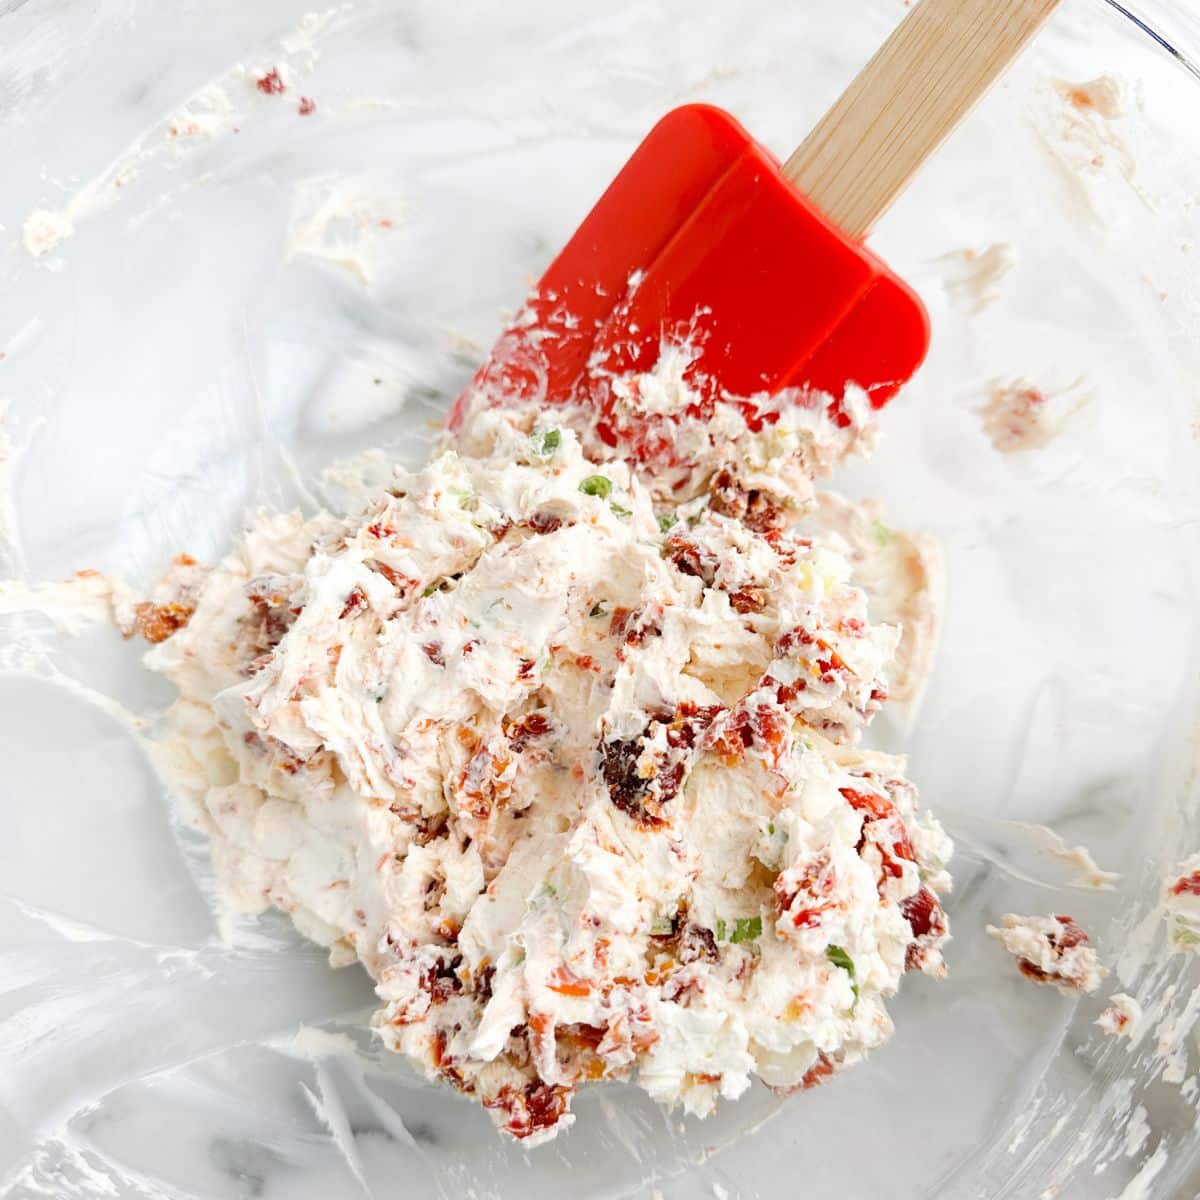 Bowl with cream cheese mixed with sun dried tomatoes and a spatula.